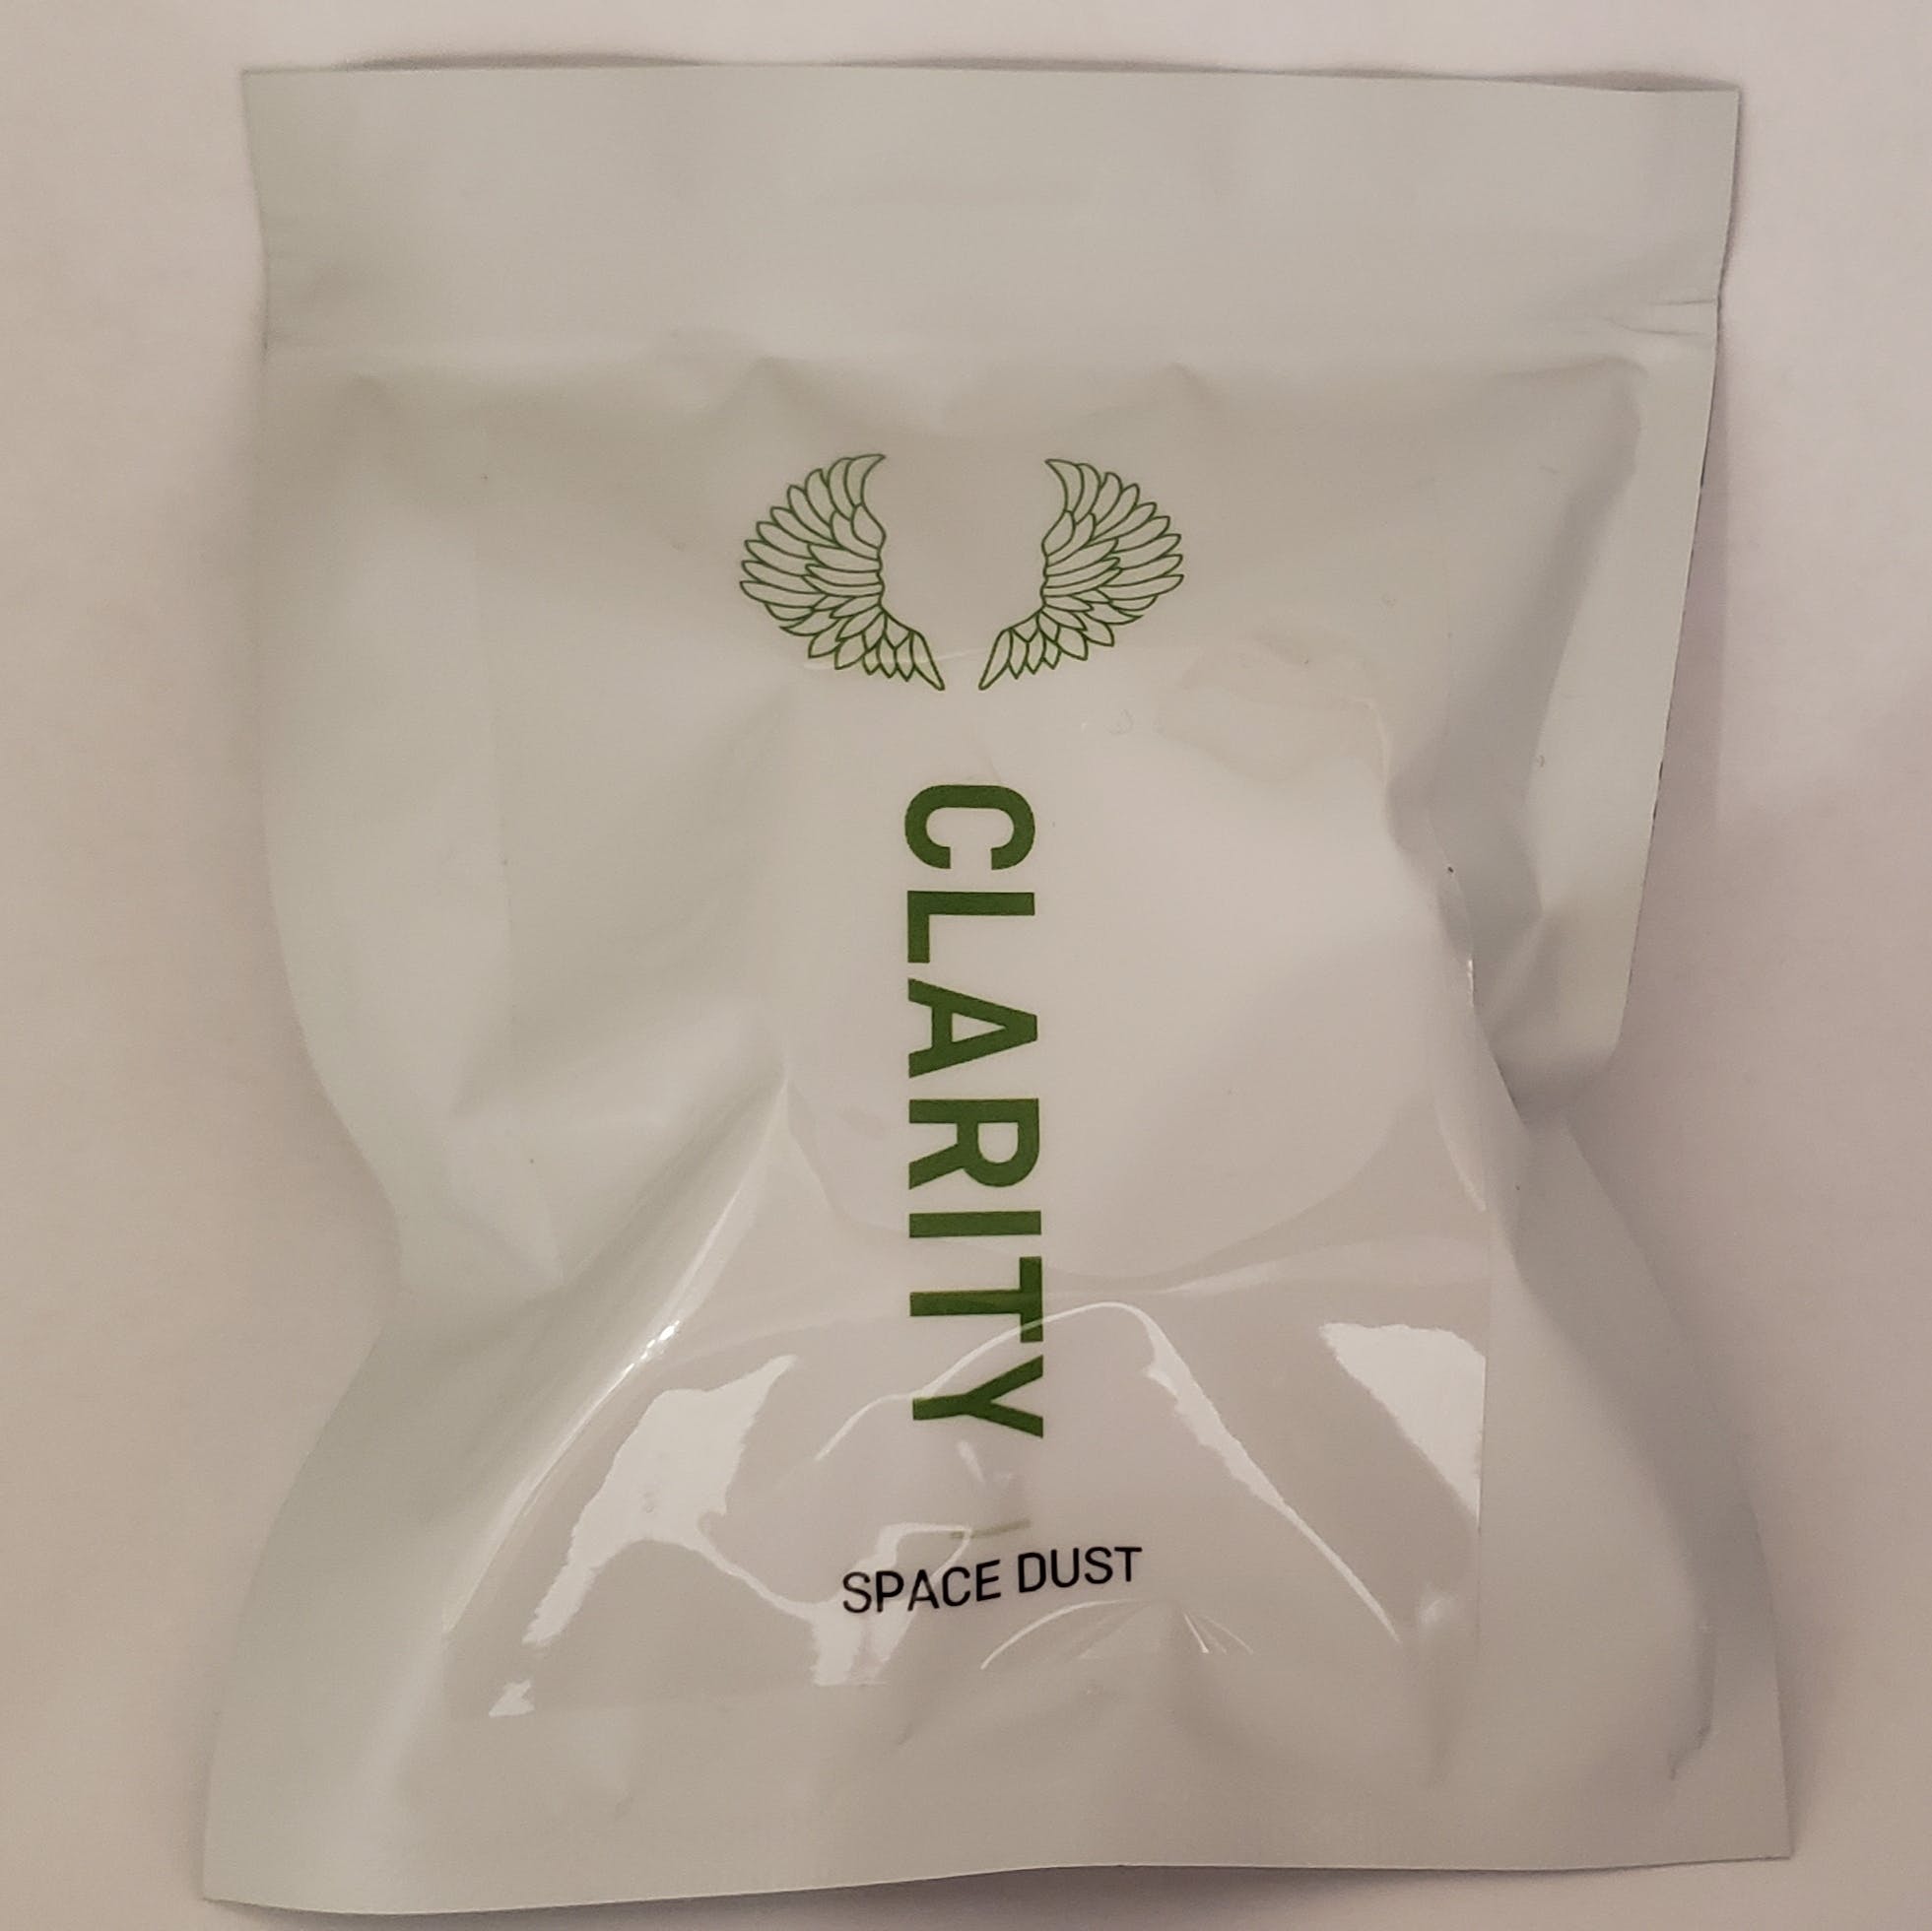 Liberty Clarity Space Dust Cannabis 1g Wax Mix